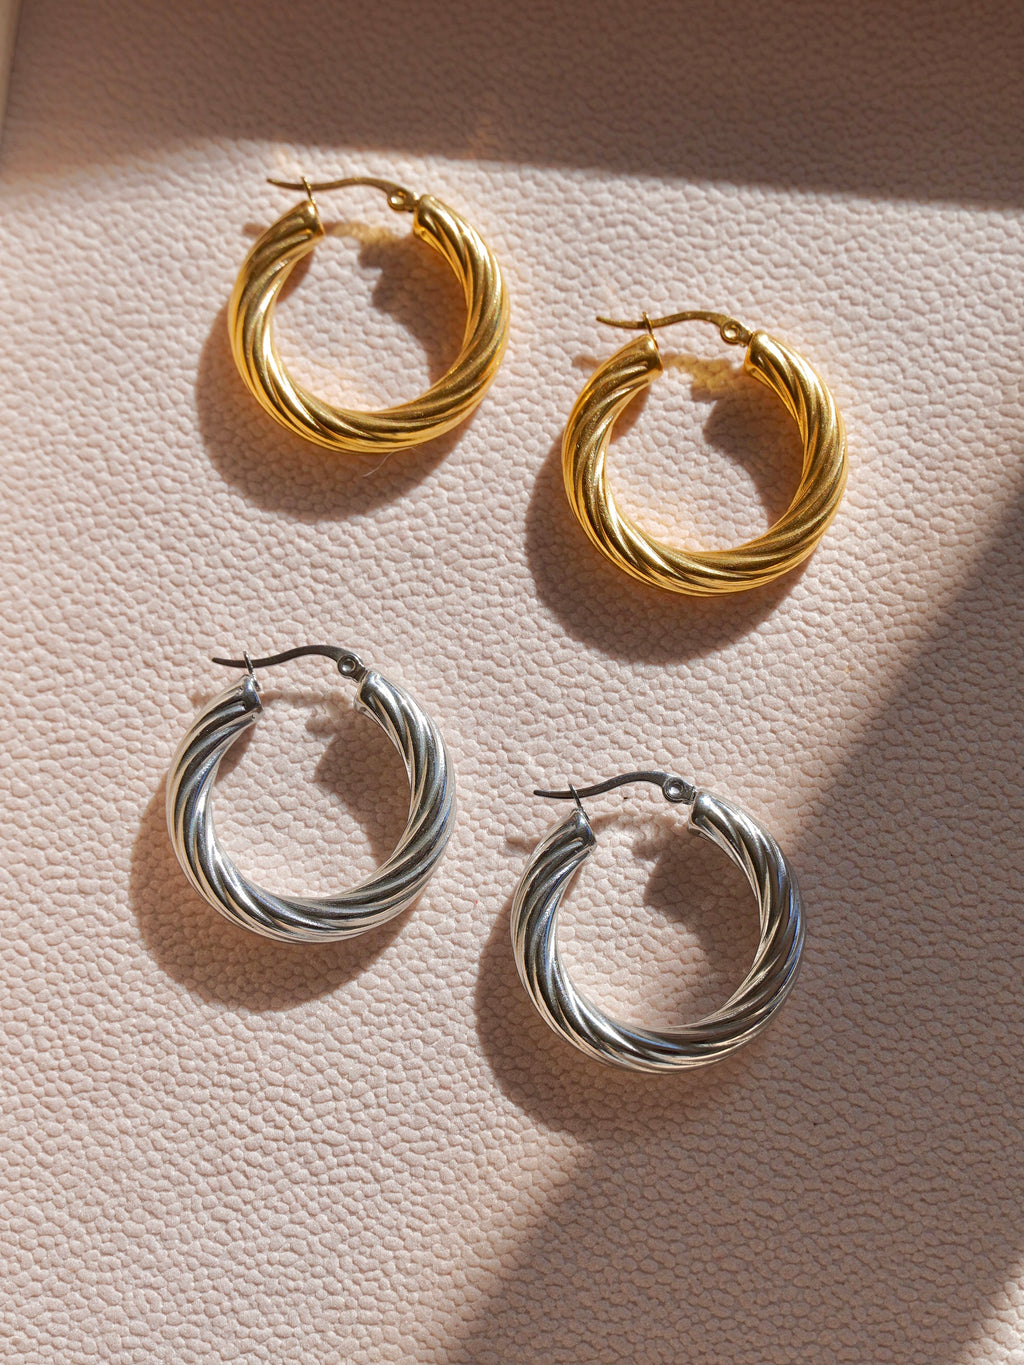 The perfect vintage hoops